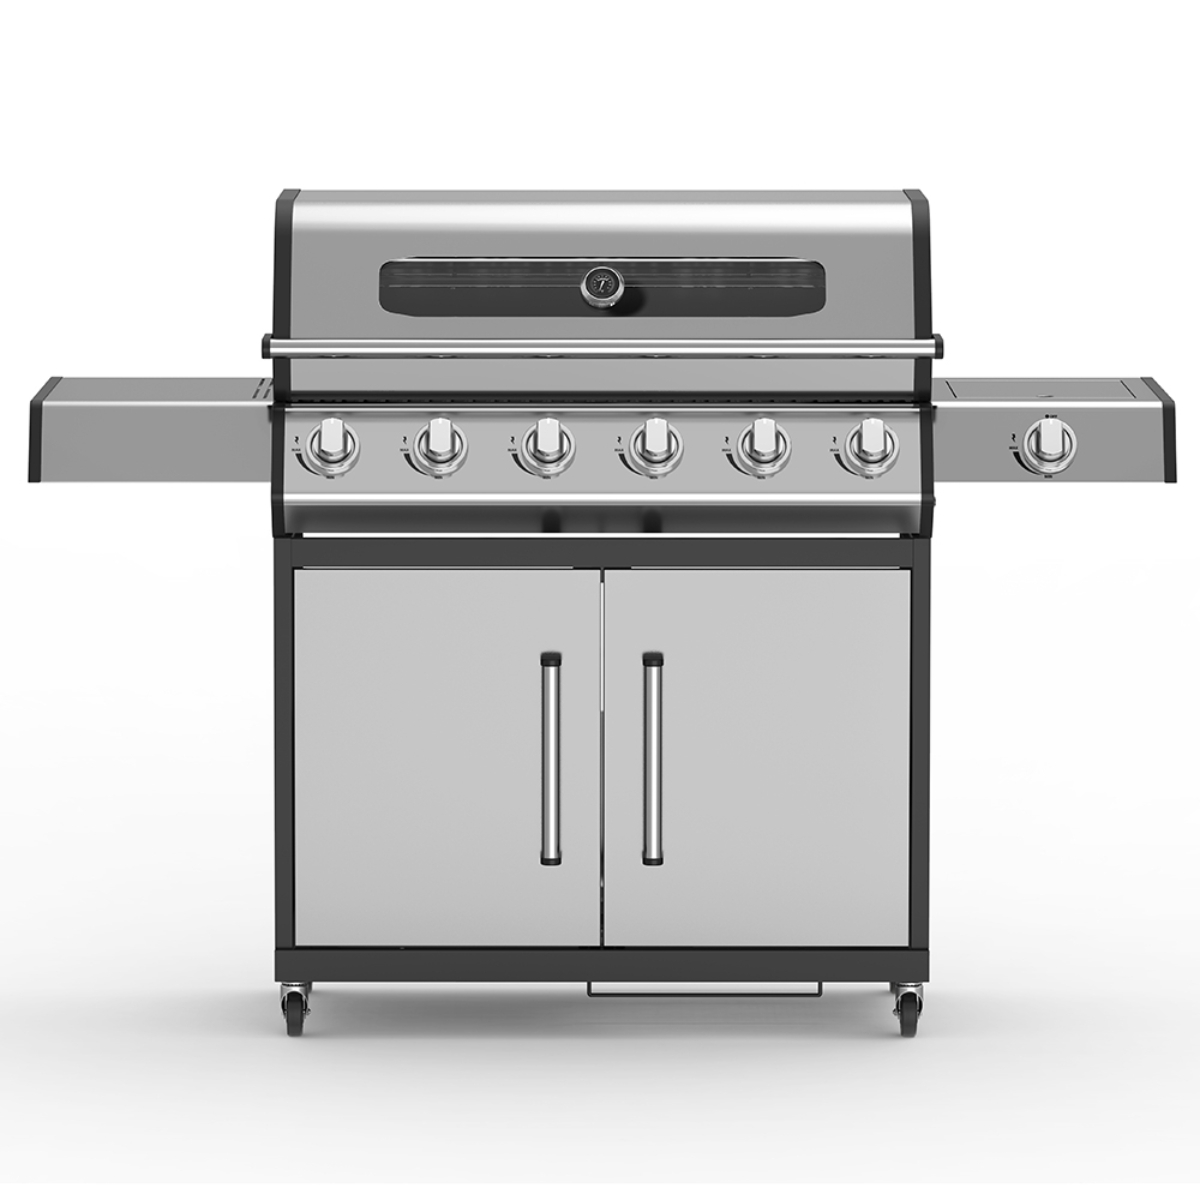 EQBA16B-2 BBQ 6 BURNER WITH SIDE BURNER GAS GRILL PATIO PROPANE GAS GRILL STAINLESS STEEL